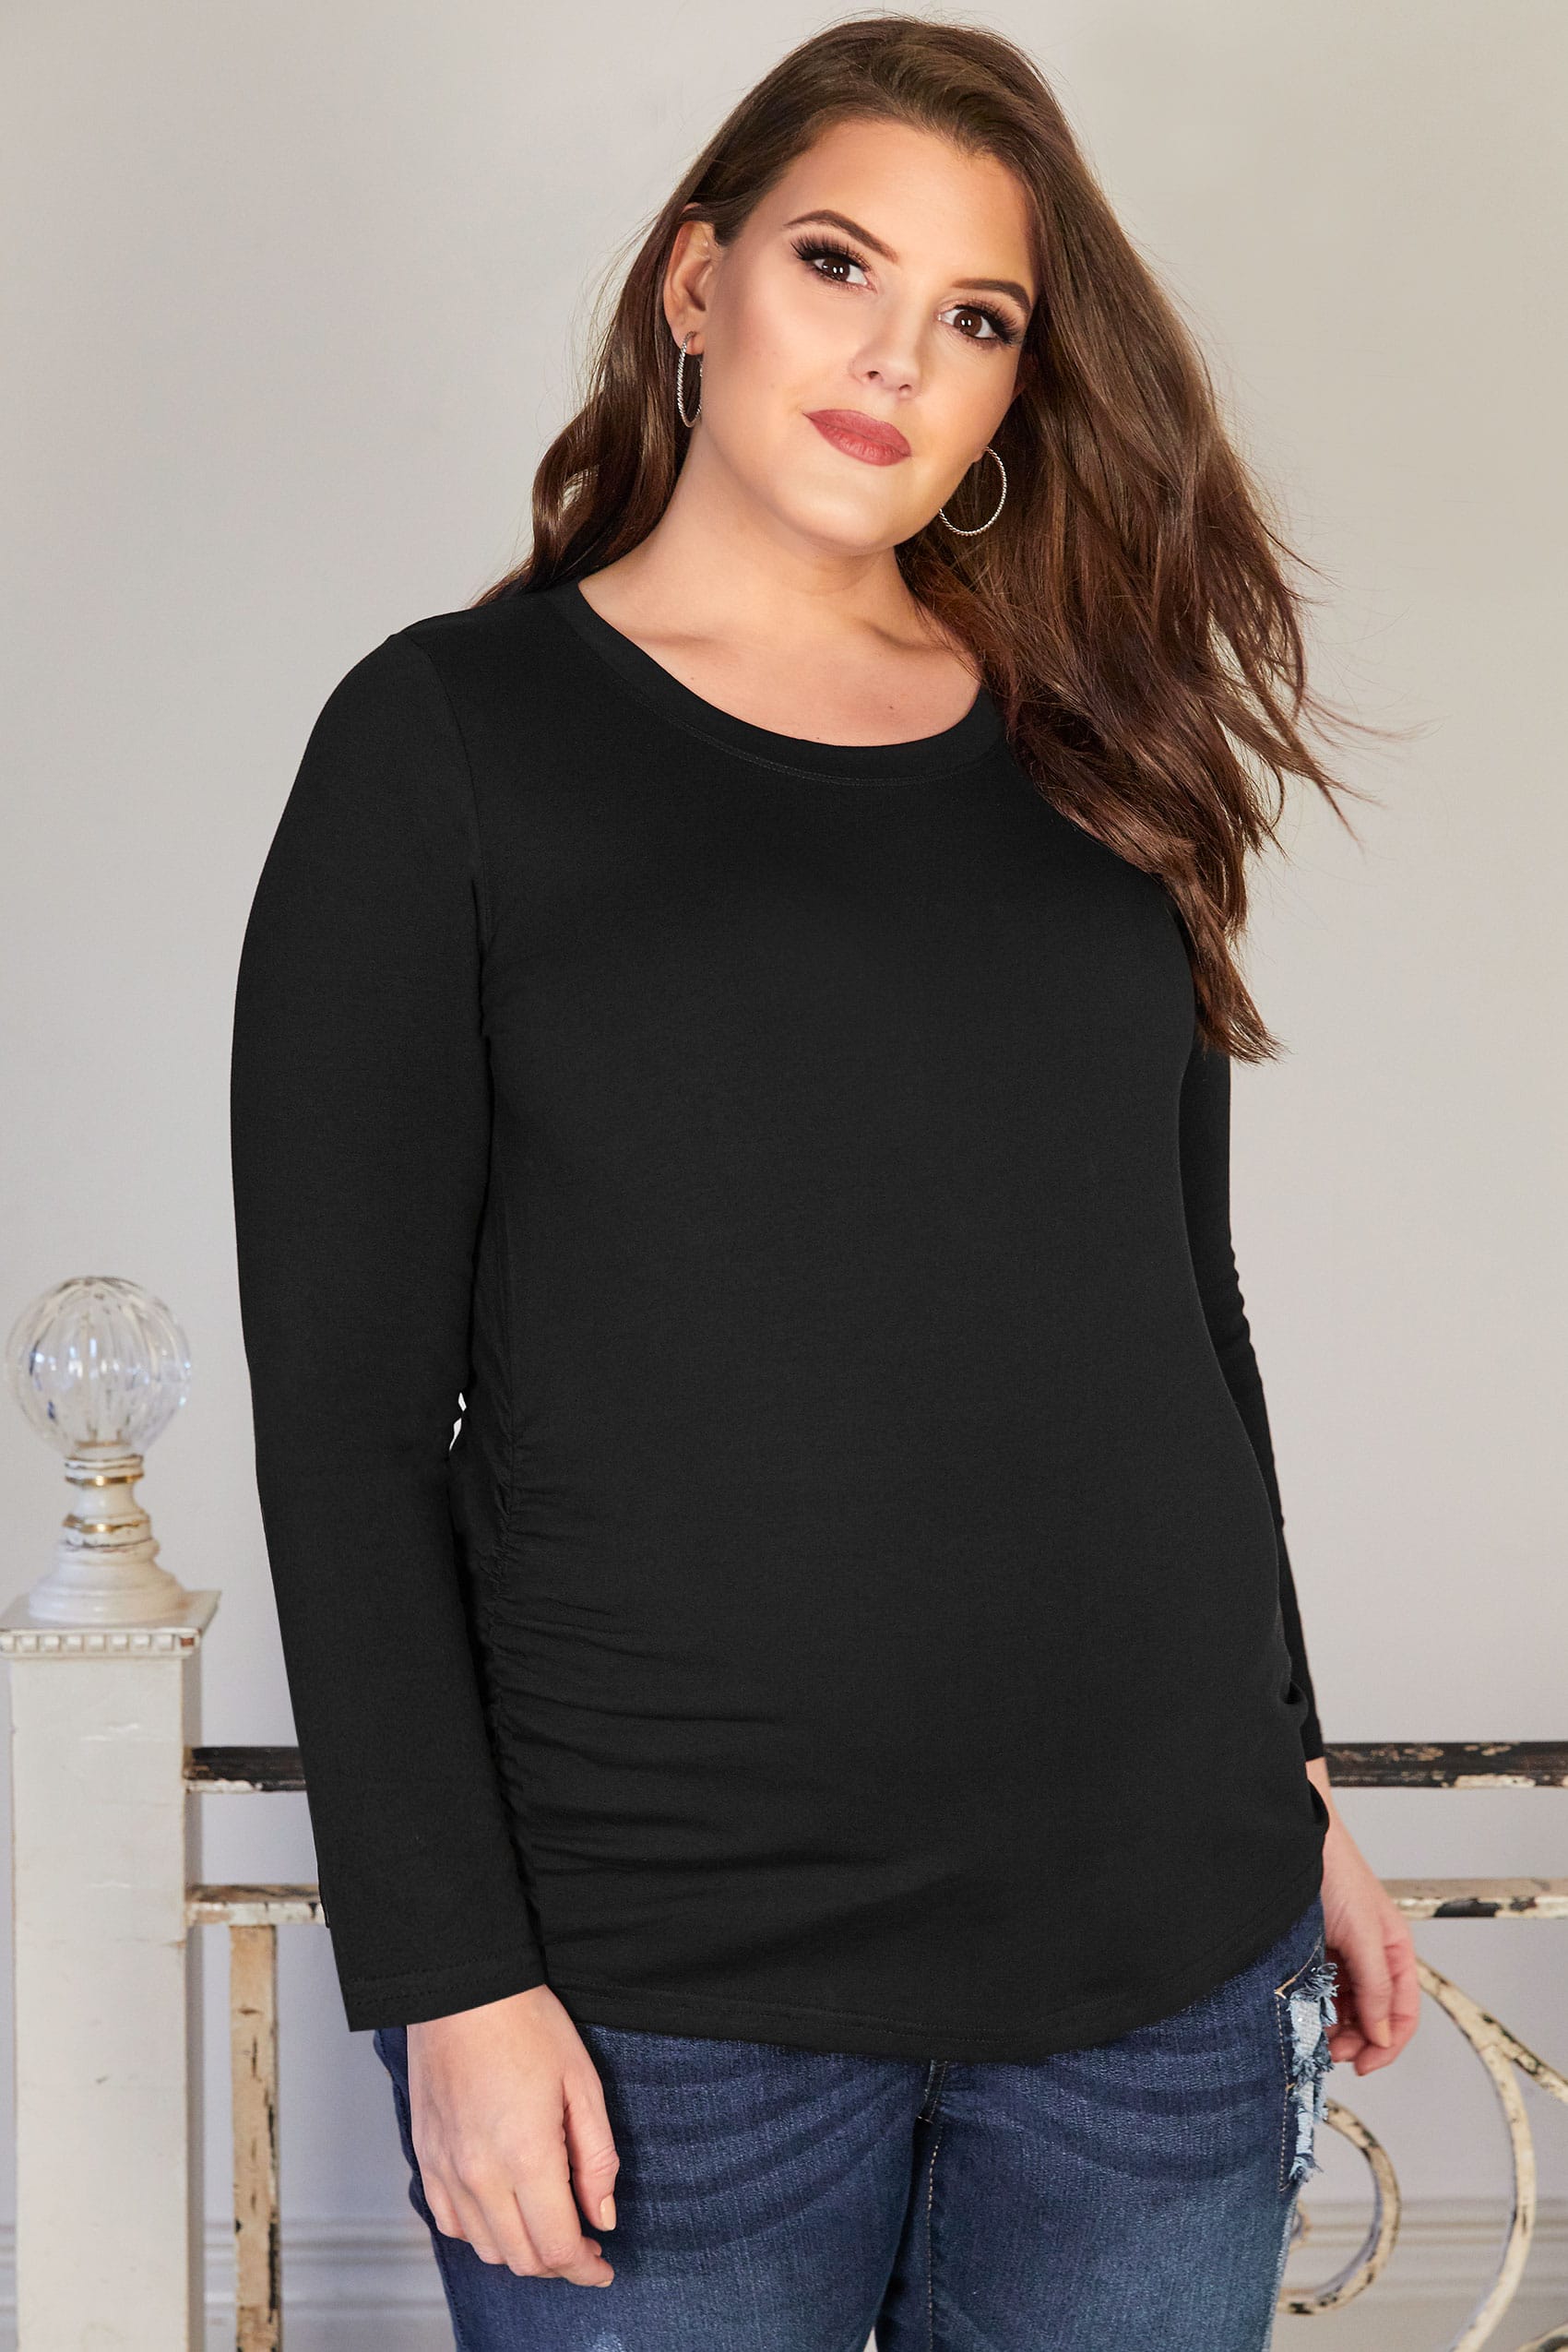 BUMP IT UP MATERNITY Black Cotton Long Sleeved Top Plus Size 16 to 32